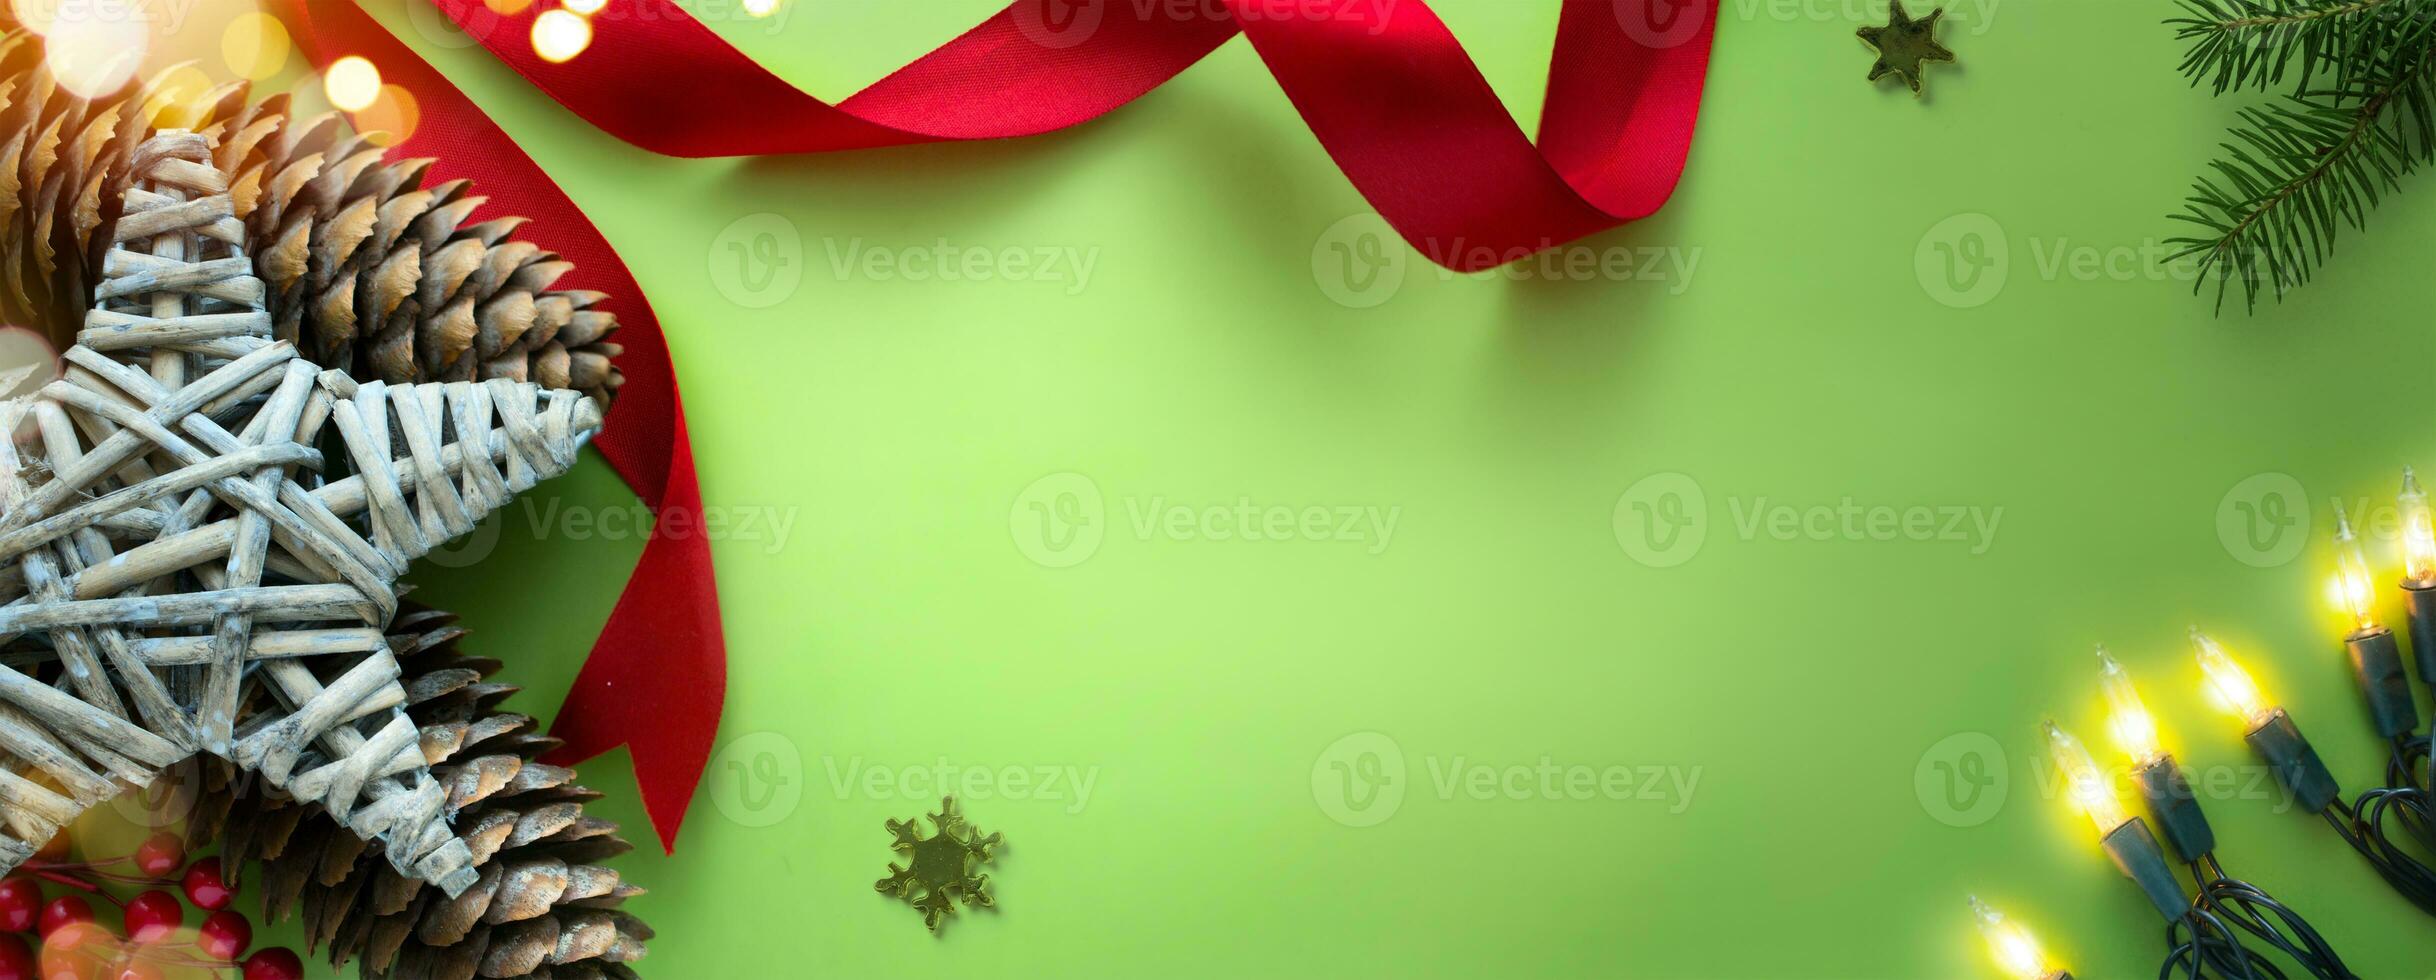 Christmas and eco-friendly handmade gift decorations. eco christmas holiday concept, eco decor banner design with copy space photo